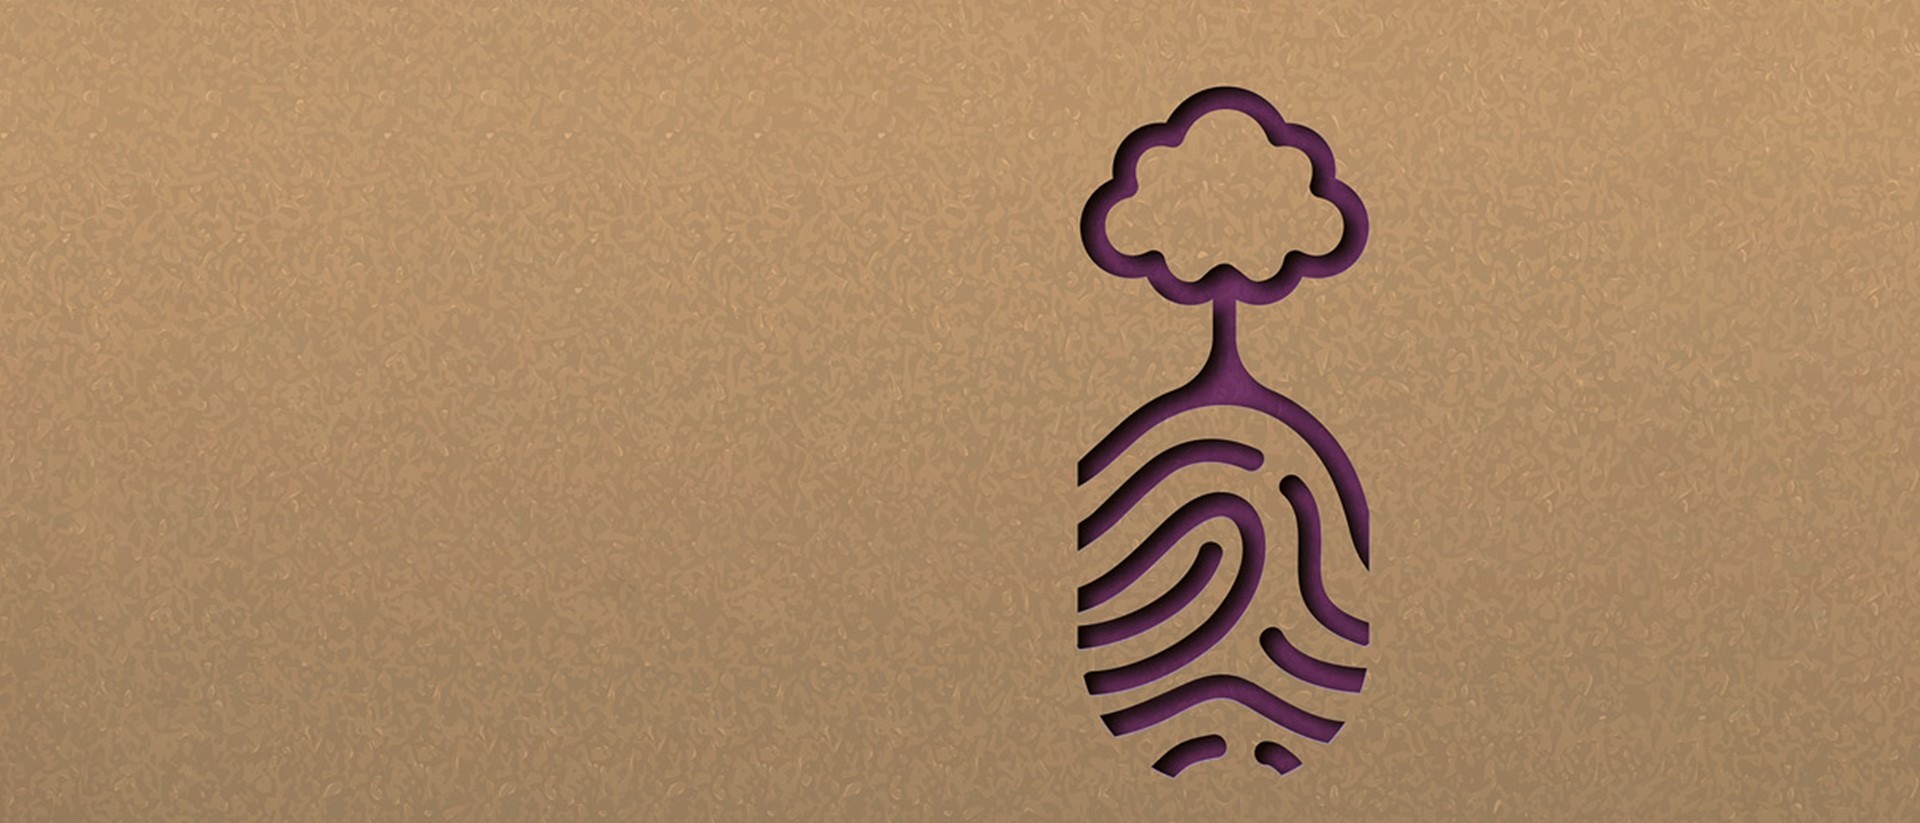 Image of a purple thumbprint with a tree coming out the top on a brown background